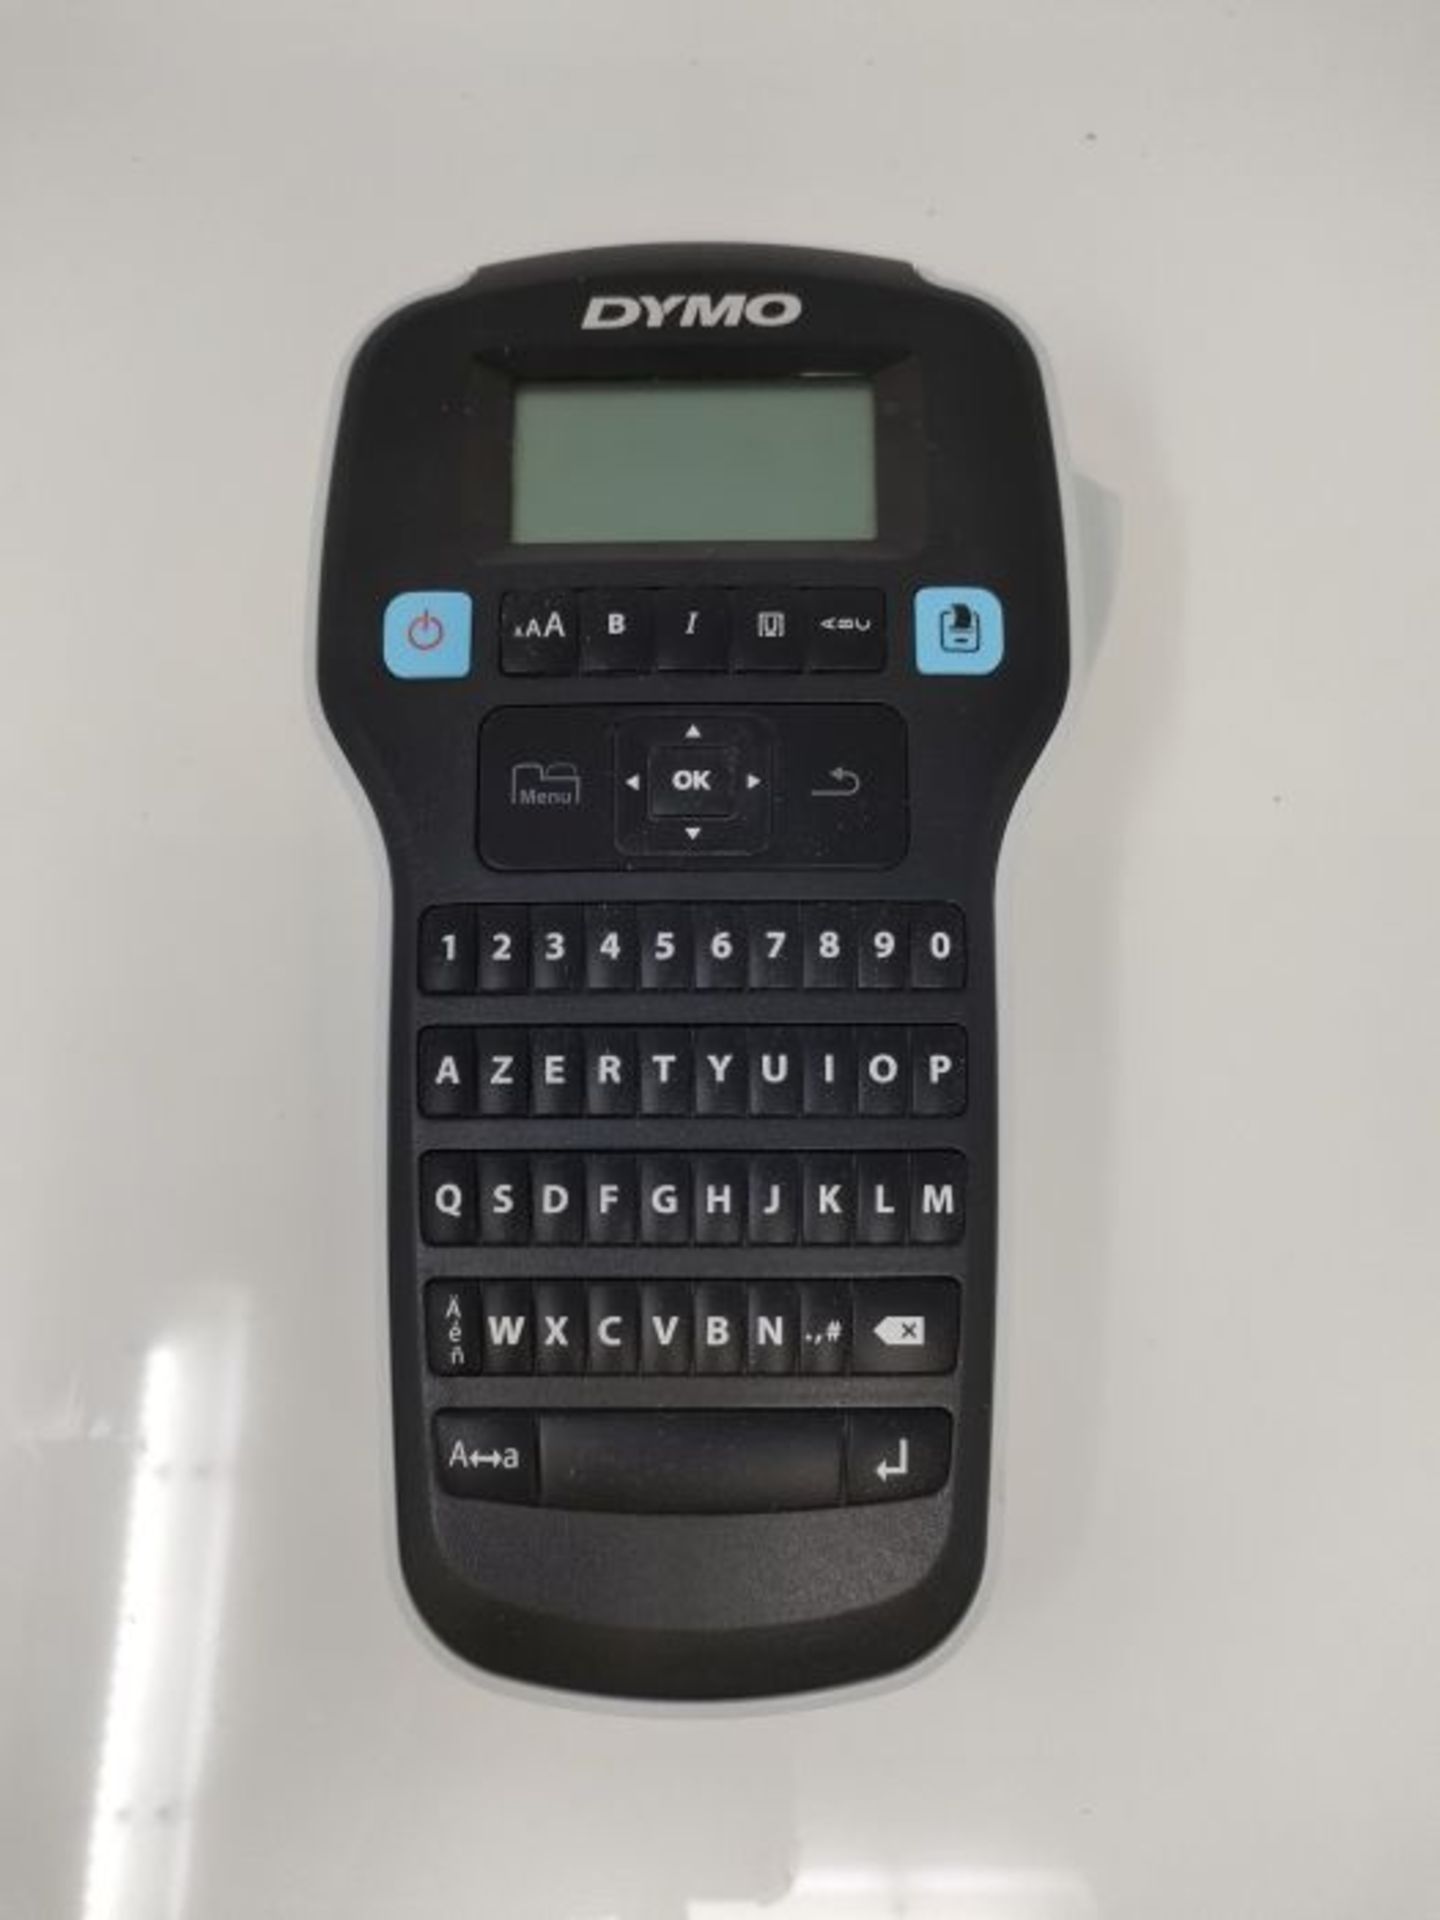 DYMO LabelManager 160 handbeschriftungsgerã 3501170946350 Device Black/Silver - Image 3 of 3